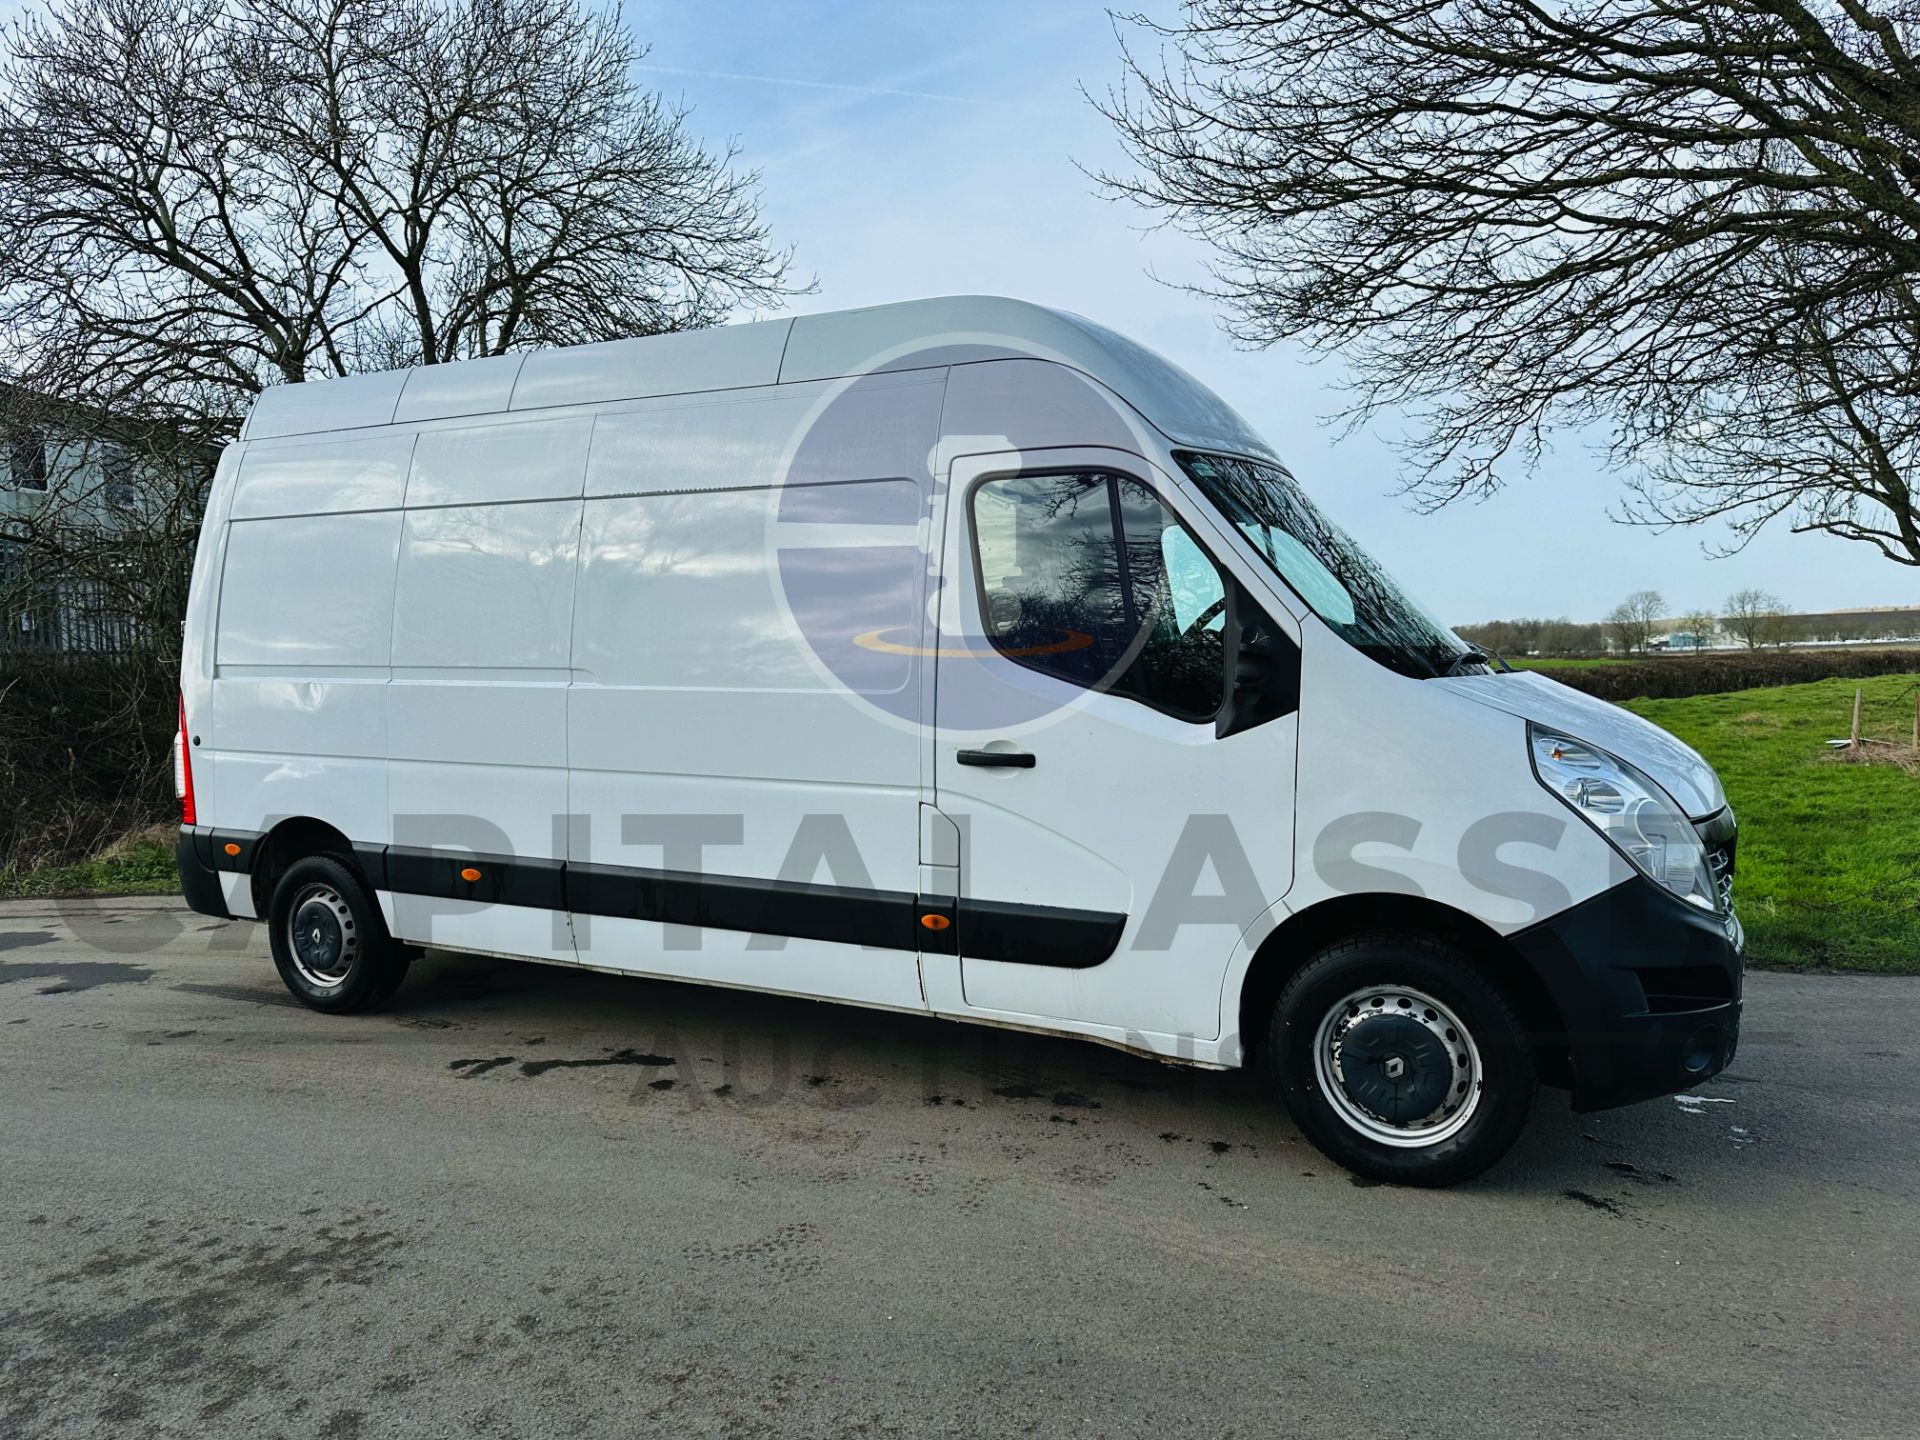 RENAULT MASTER *BUSINESS ENERGY* LWB EXTRA HI-ROOF (2019 - EURO 6) 2.3 DCI - 145 BHP - 6 SPEED